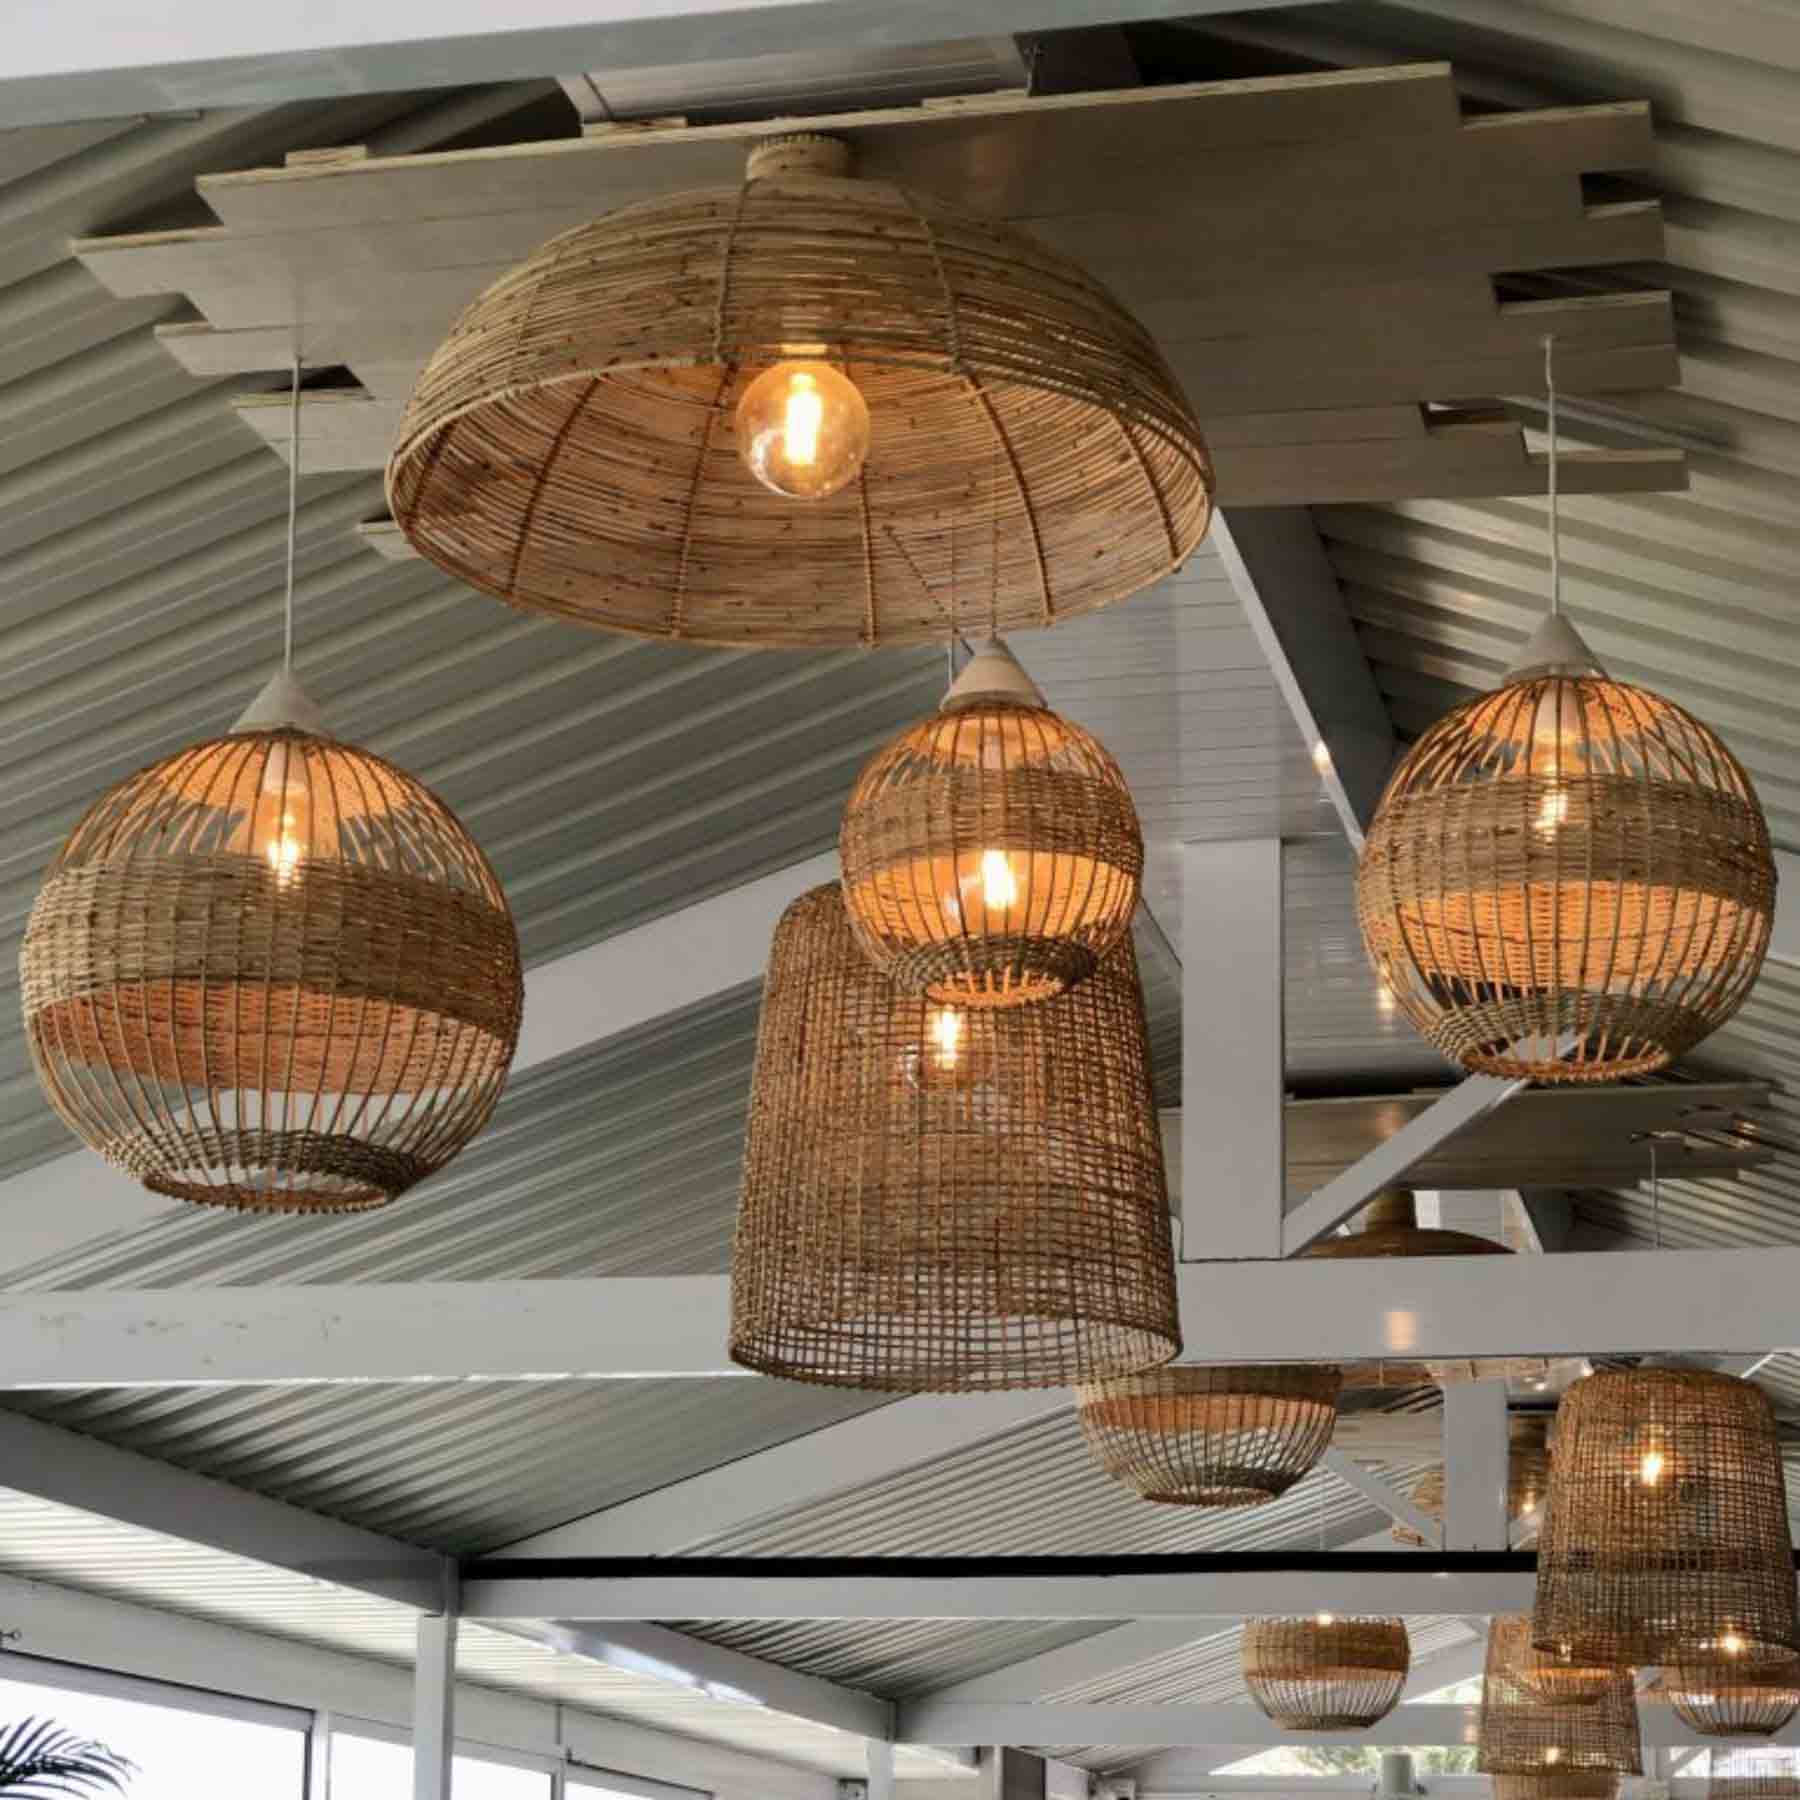 the current market presents a wealth of designs for rattan pendant lights providing an array of options to explore